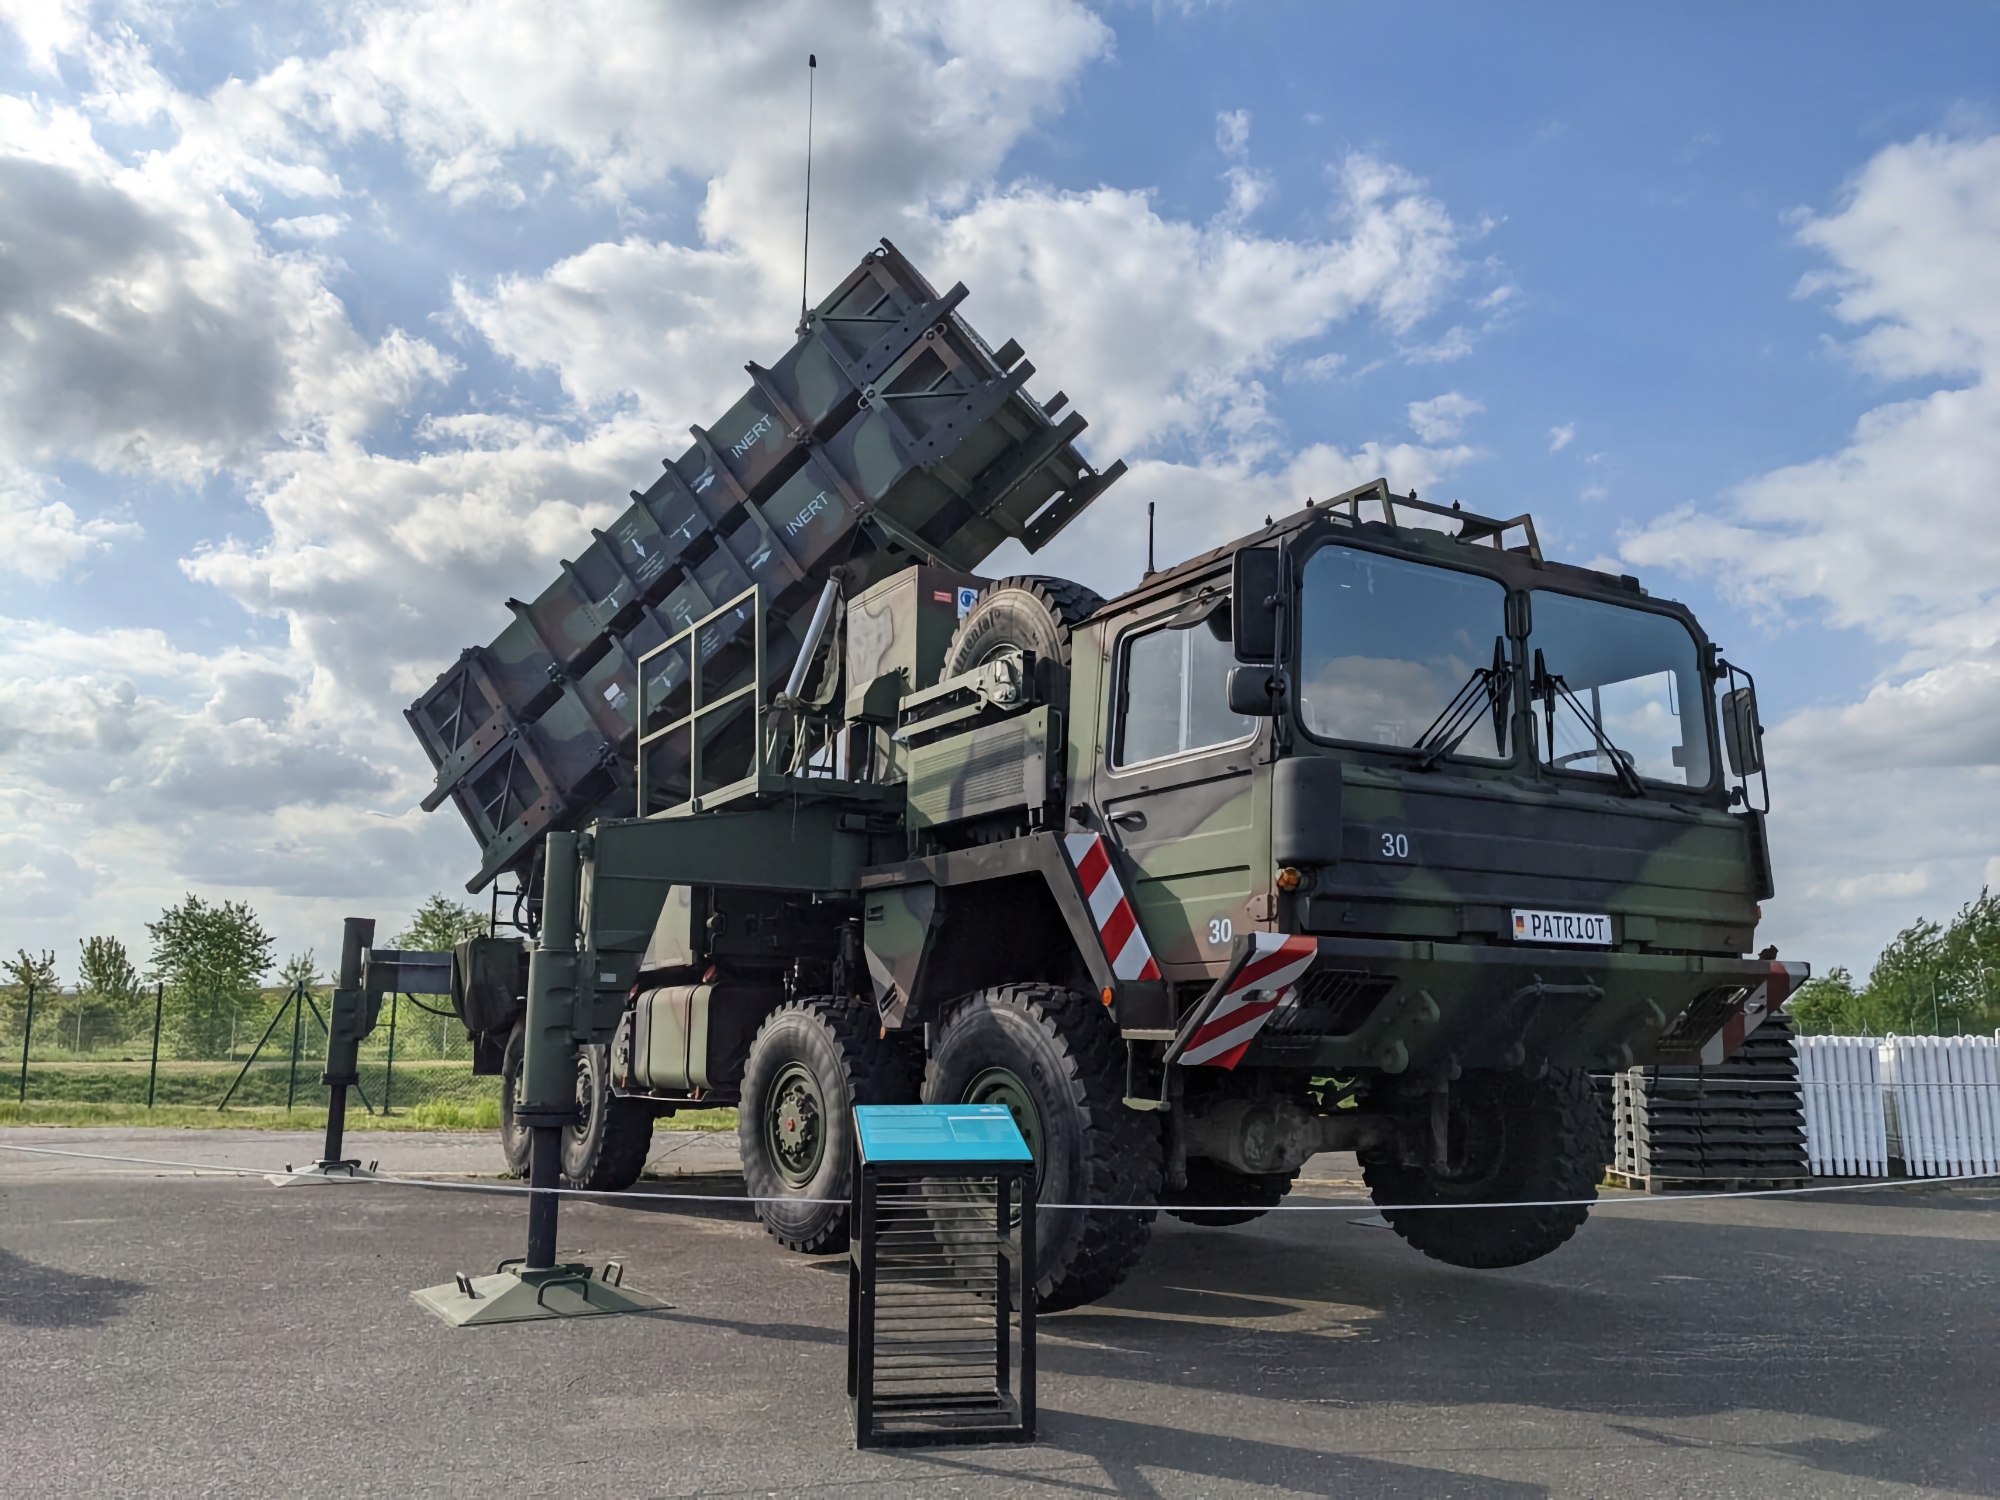 Germany to transfer additional MIM-104 Patriot surface-to-air missile system to Ukraine